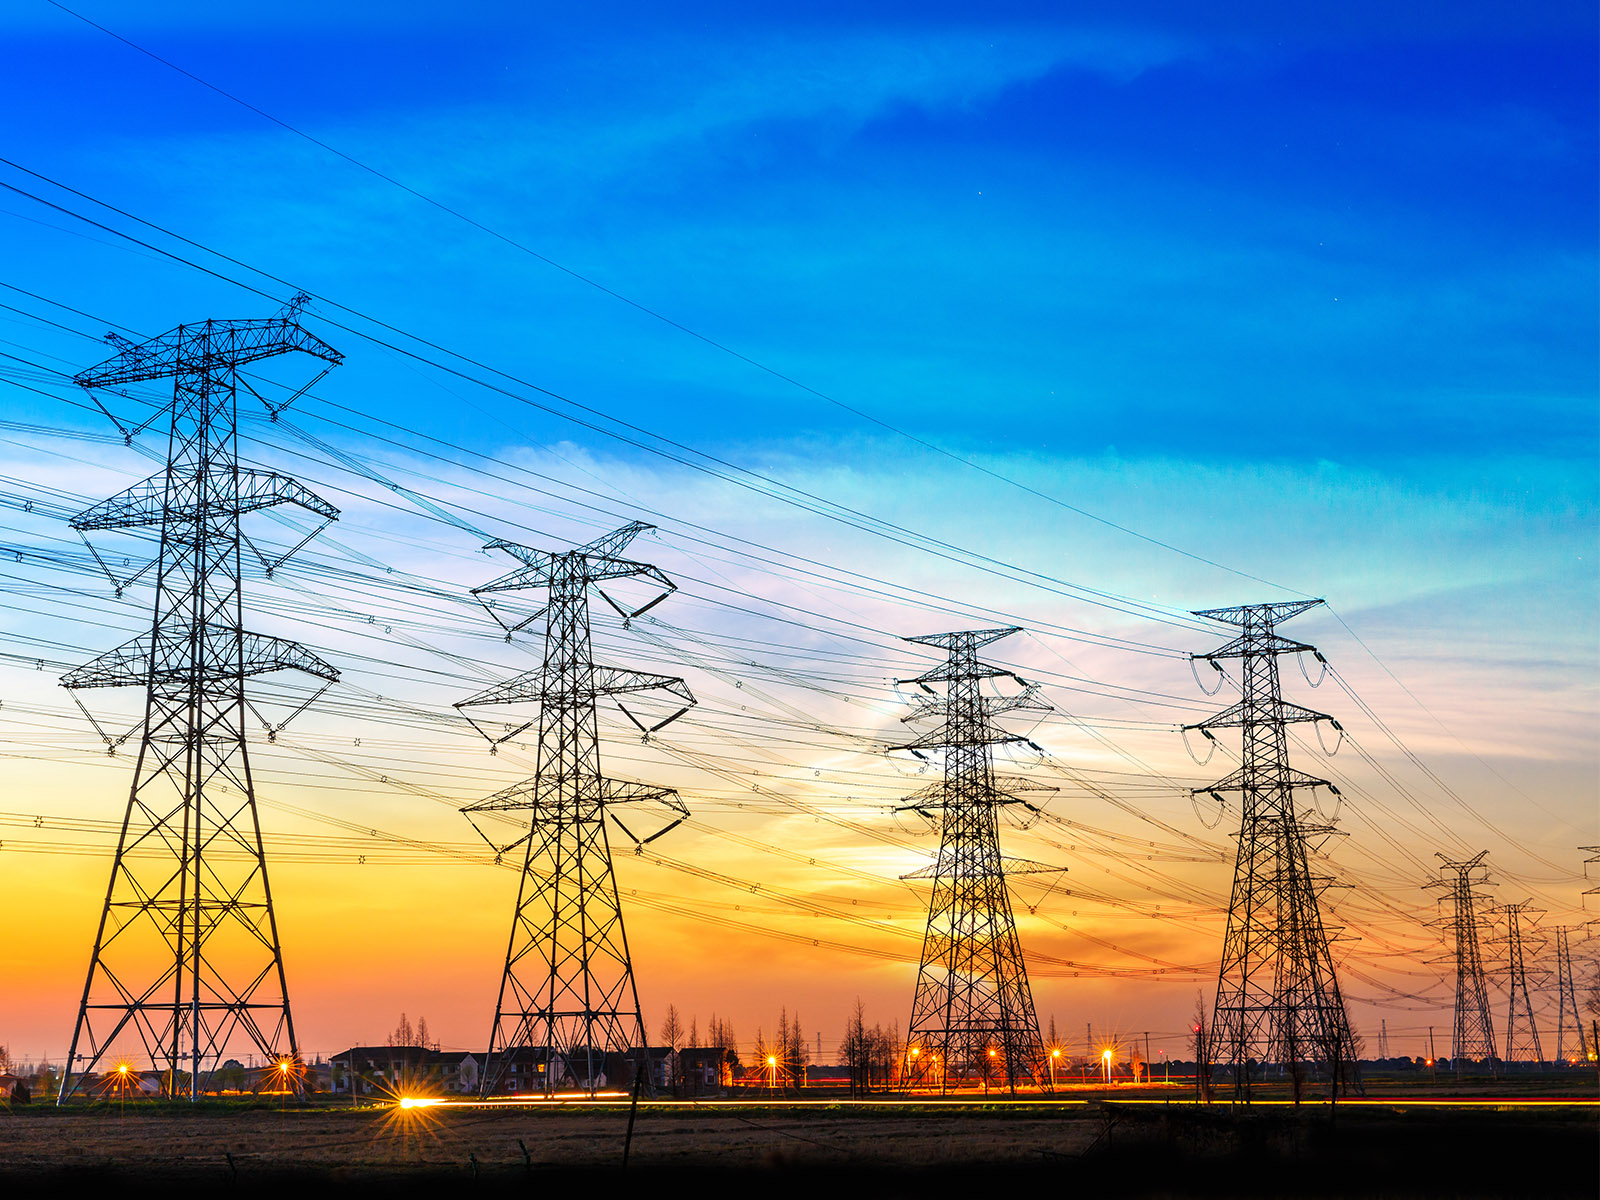 Image of grid transmission lines with a beautiful orange-red sky in the background.